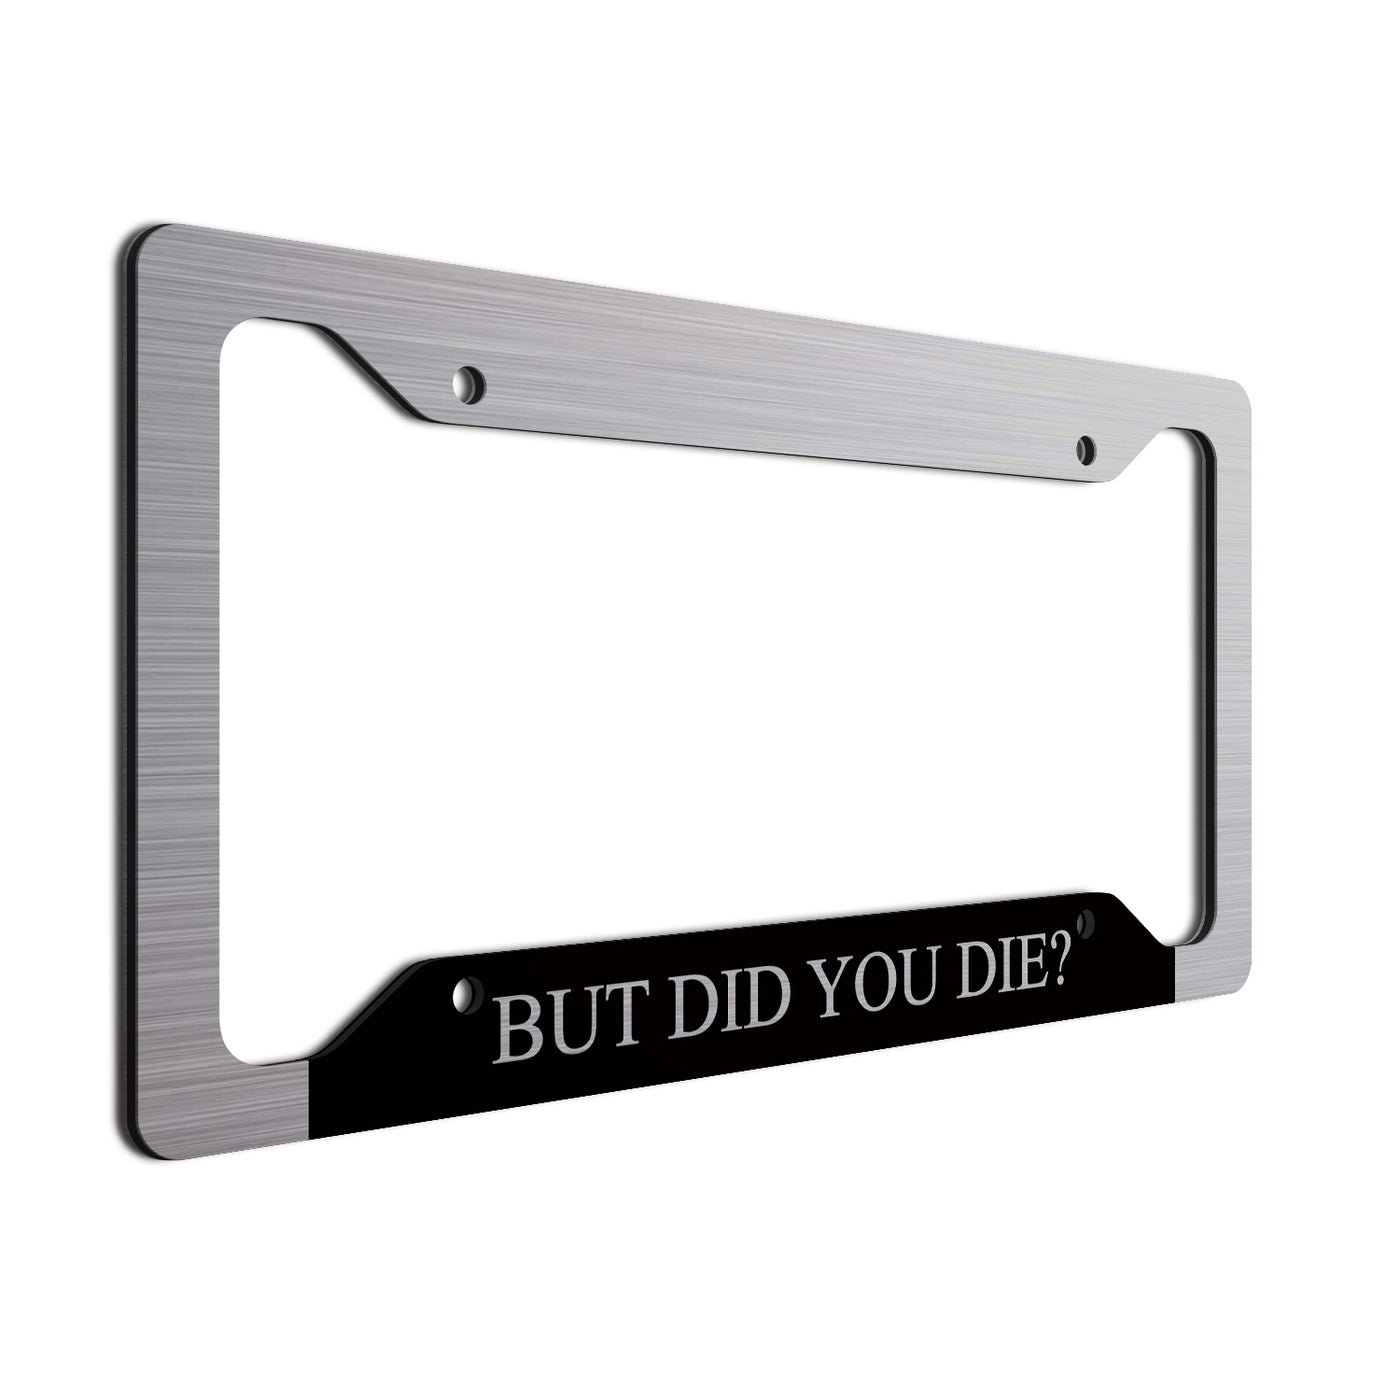 But Did You Die? License Plate Frame with a brushed aluminum finish. Text is silver on black 